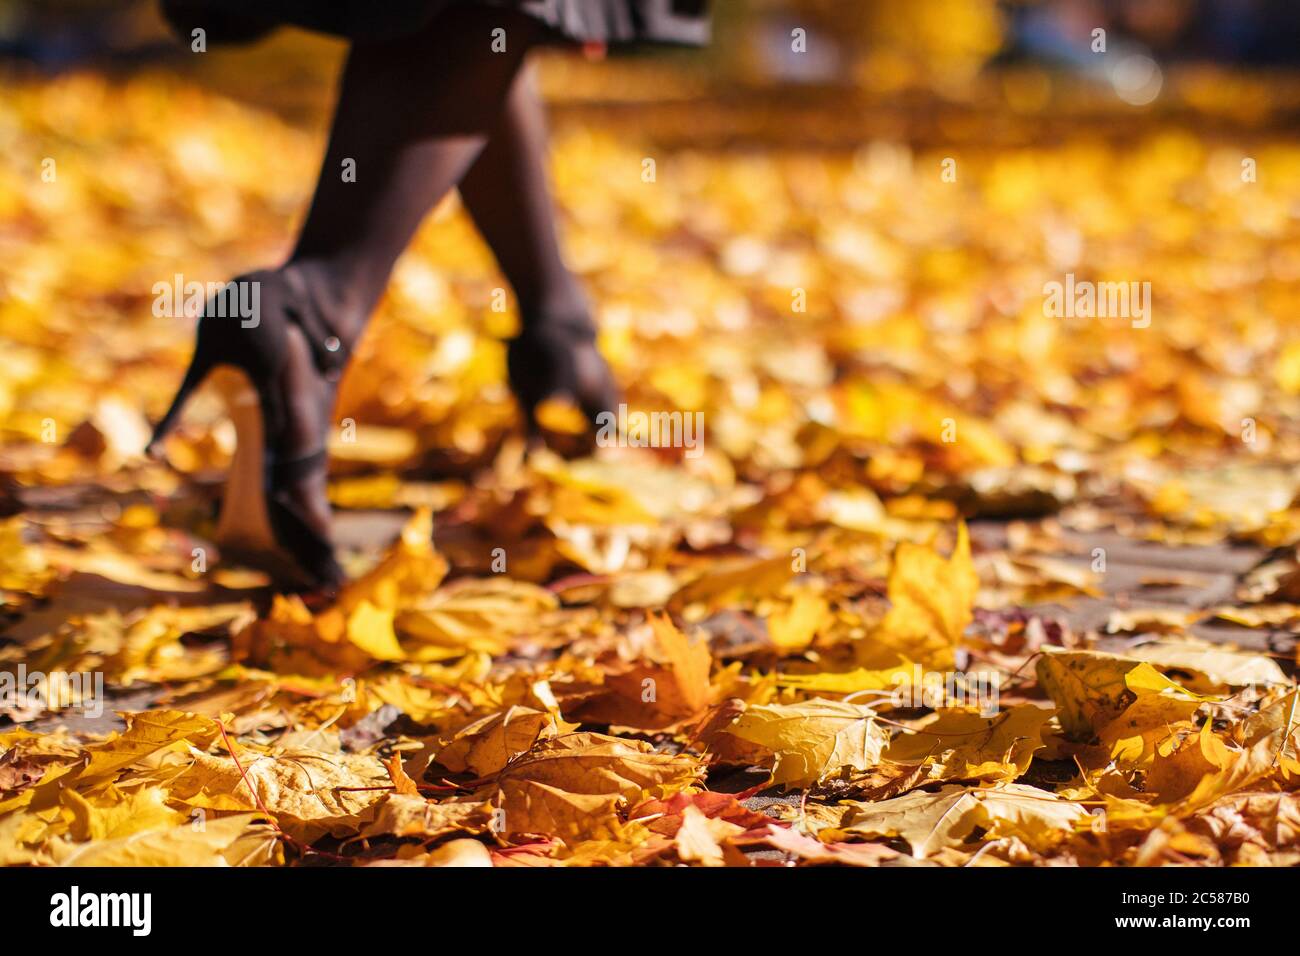 Woman walking on dry fallen leaves in sunny weather, blurred background, soft focus. Female legs with heels on autumn leaves Stock Photo